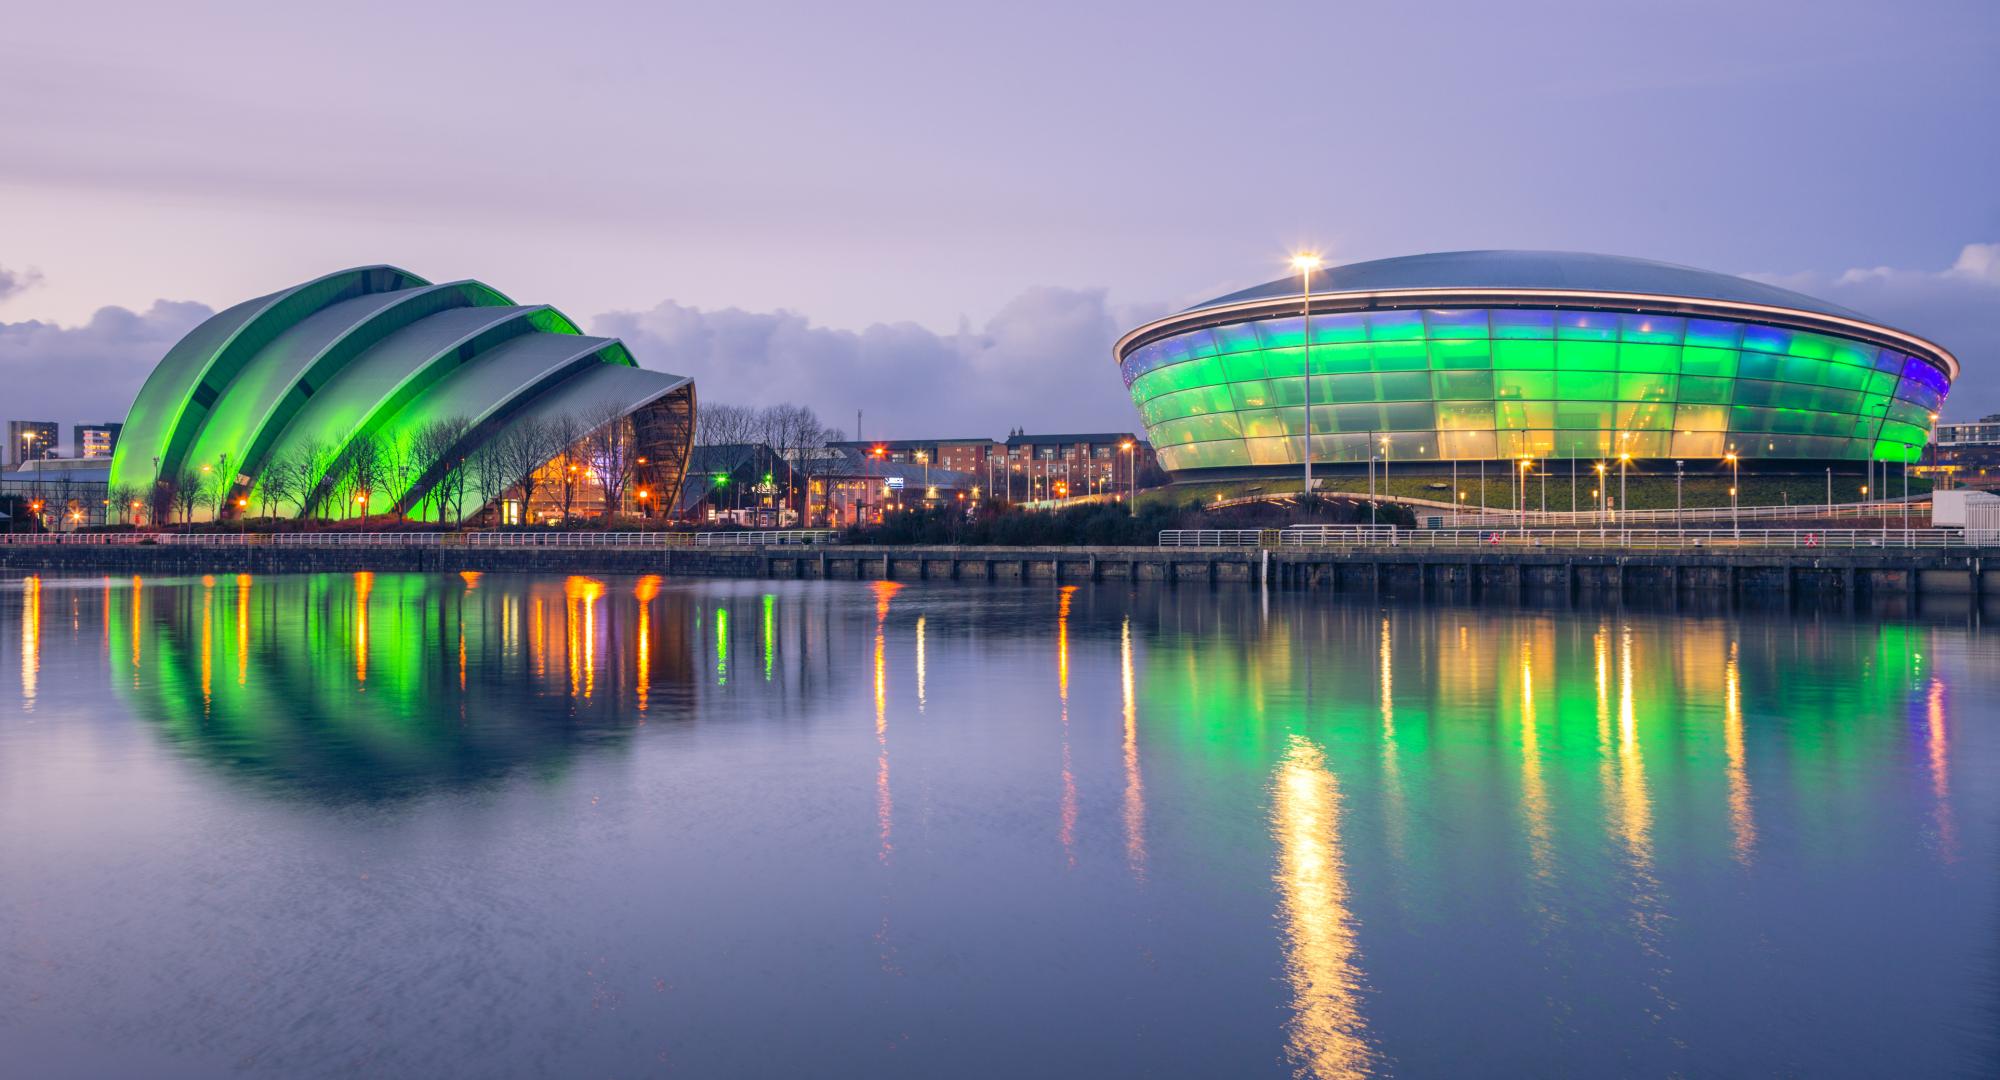 The Scottish Exhibition and Conference Centre Clyde Auditorium and the Scottish Hydro Arena lit up green at night